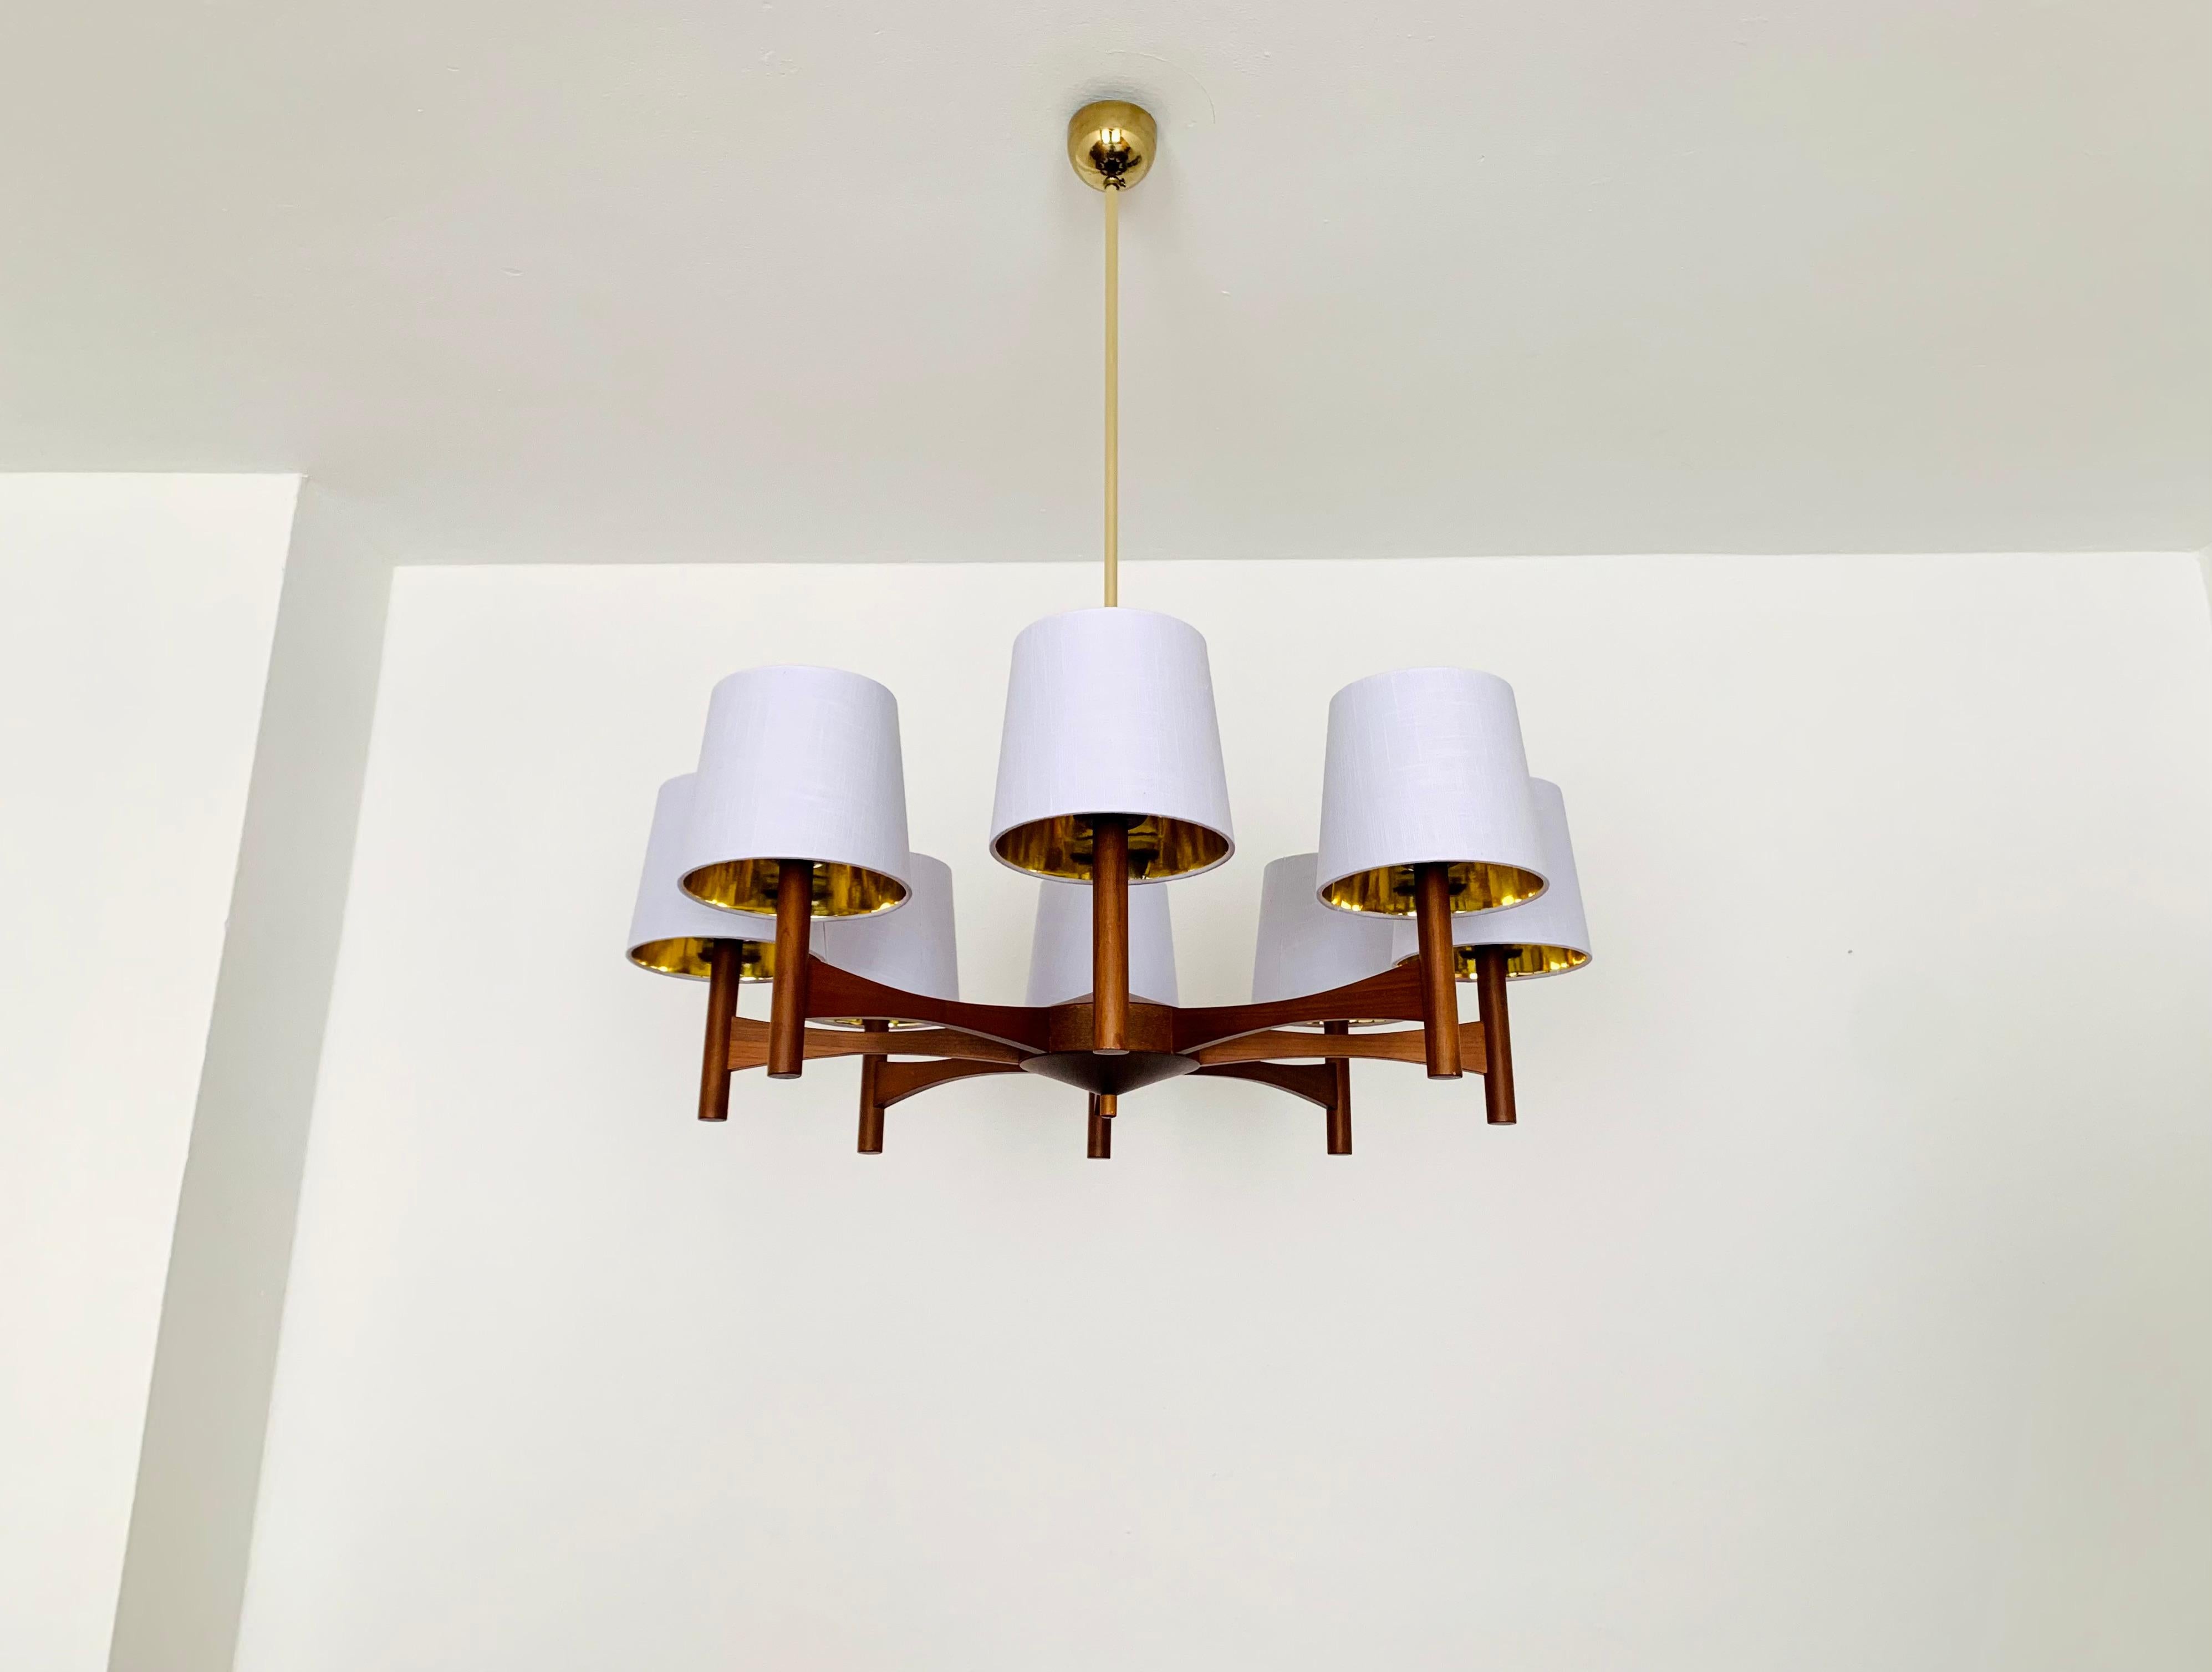 Very large and beautiful chandelier from the 1960s.
Great and unusual design with a fantastically comfortable look.
The frame made of cherry wood is very noble.

Manufacturer: Temde

Condition:

Very good vintage condition with slight signs of wear